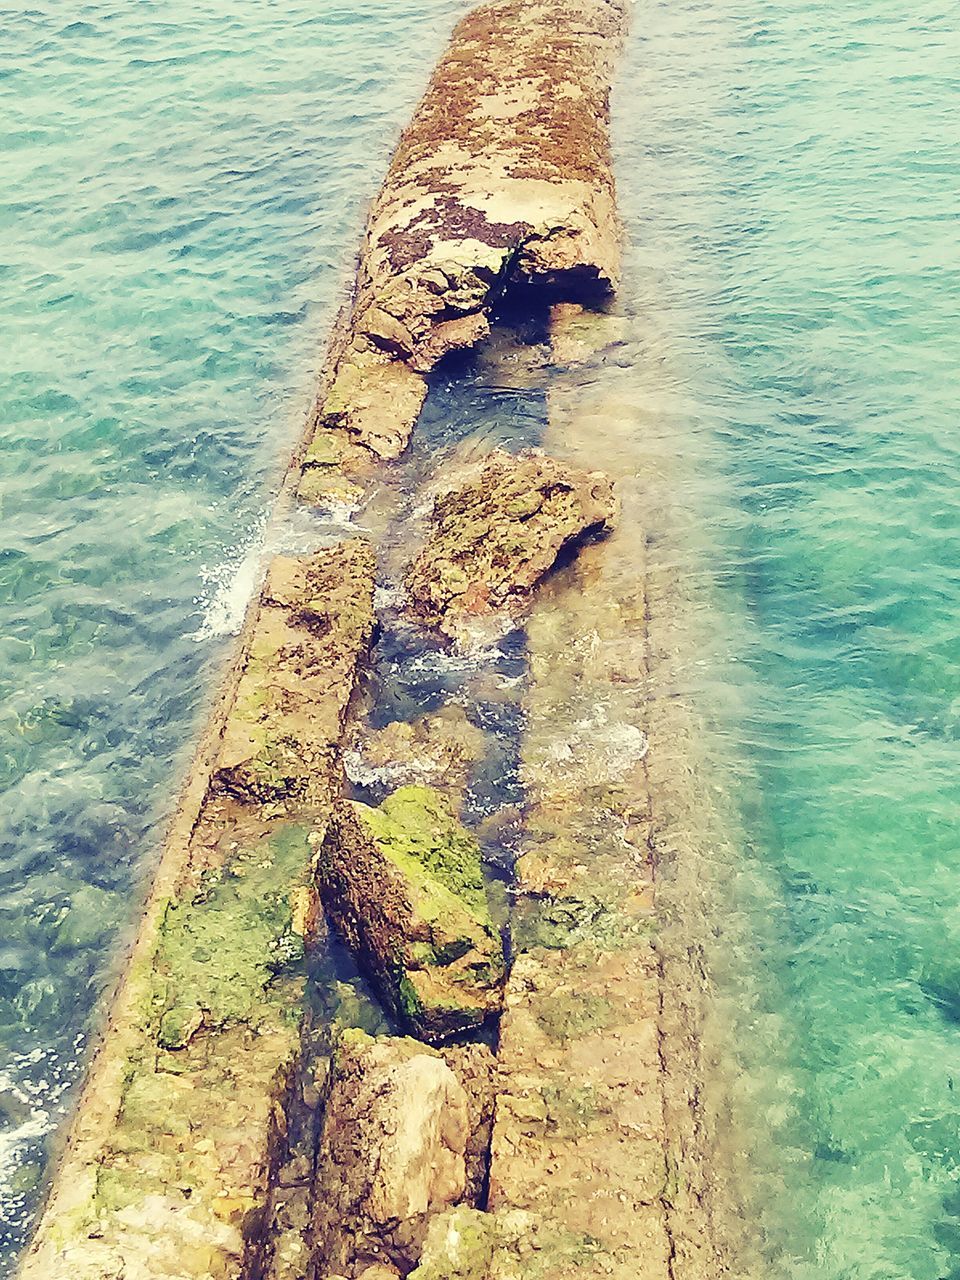 water, sea, high angle view, nature, day, outdoors, sunlight, rippled, rusty, pier, wood - material, tranquility, rock - object, no people, beach, metal, old, river, railing, shore